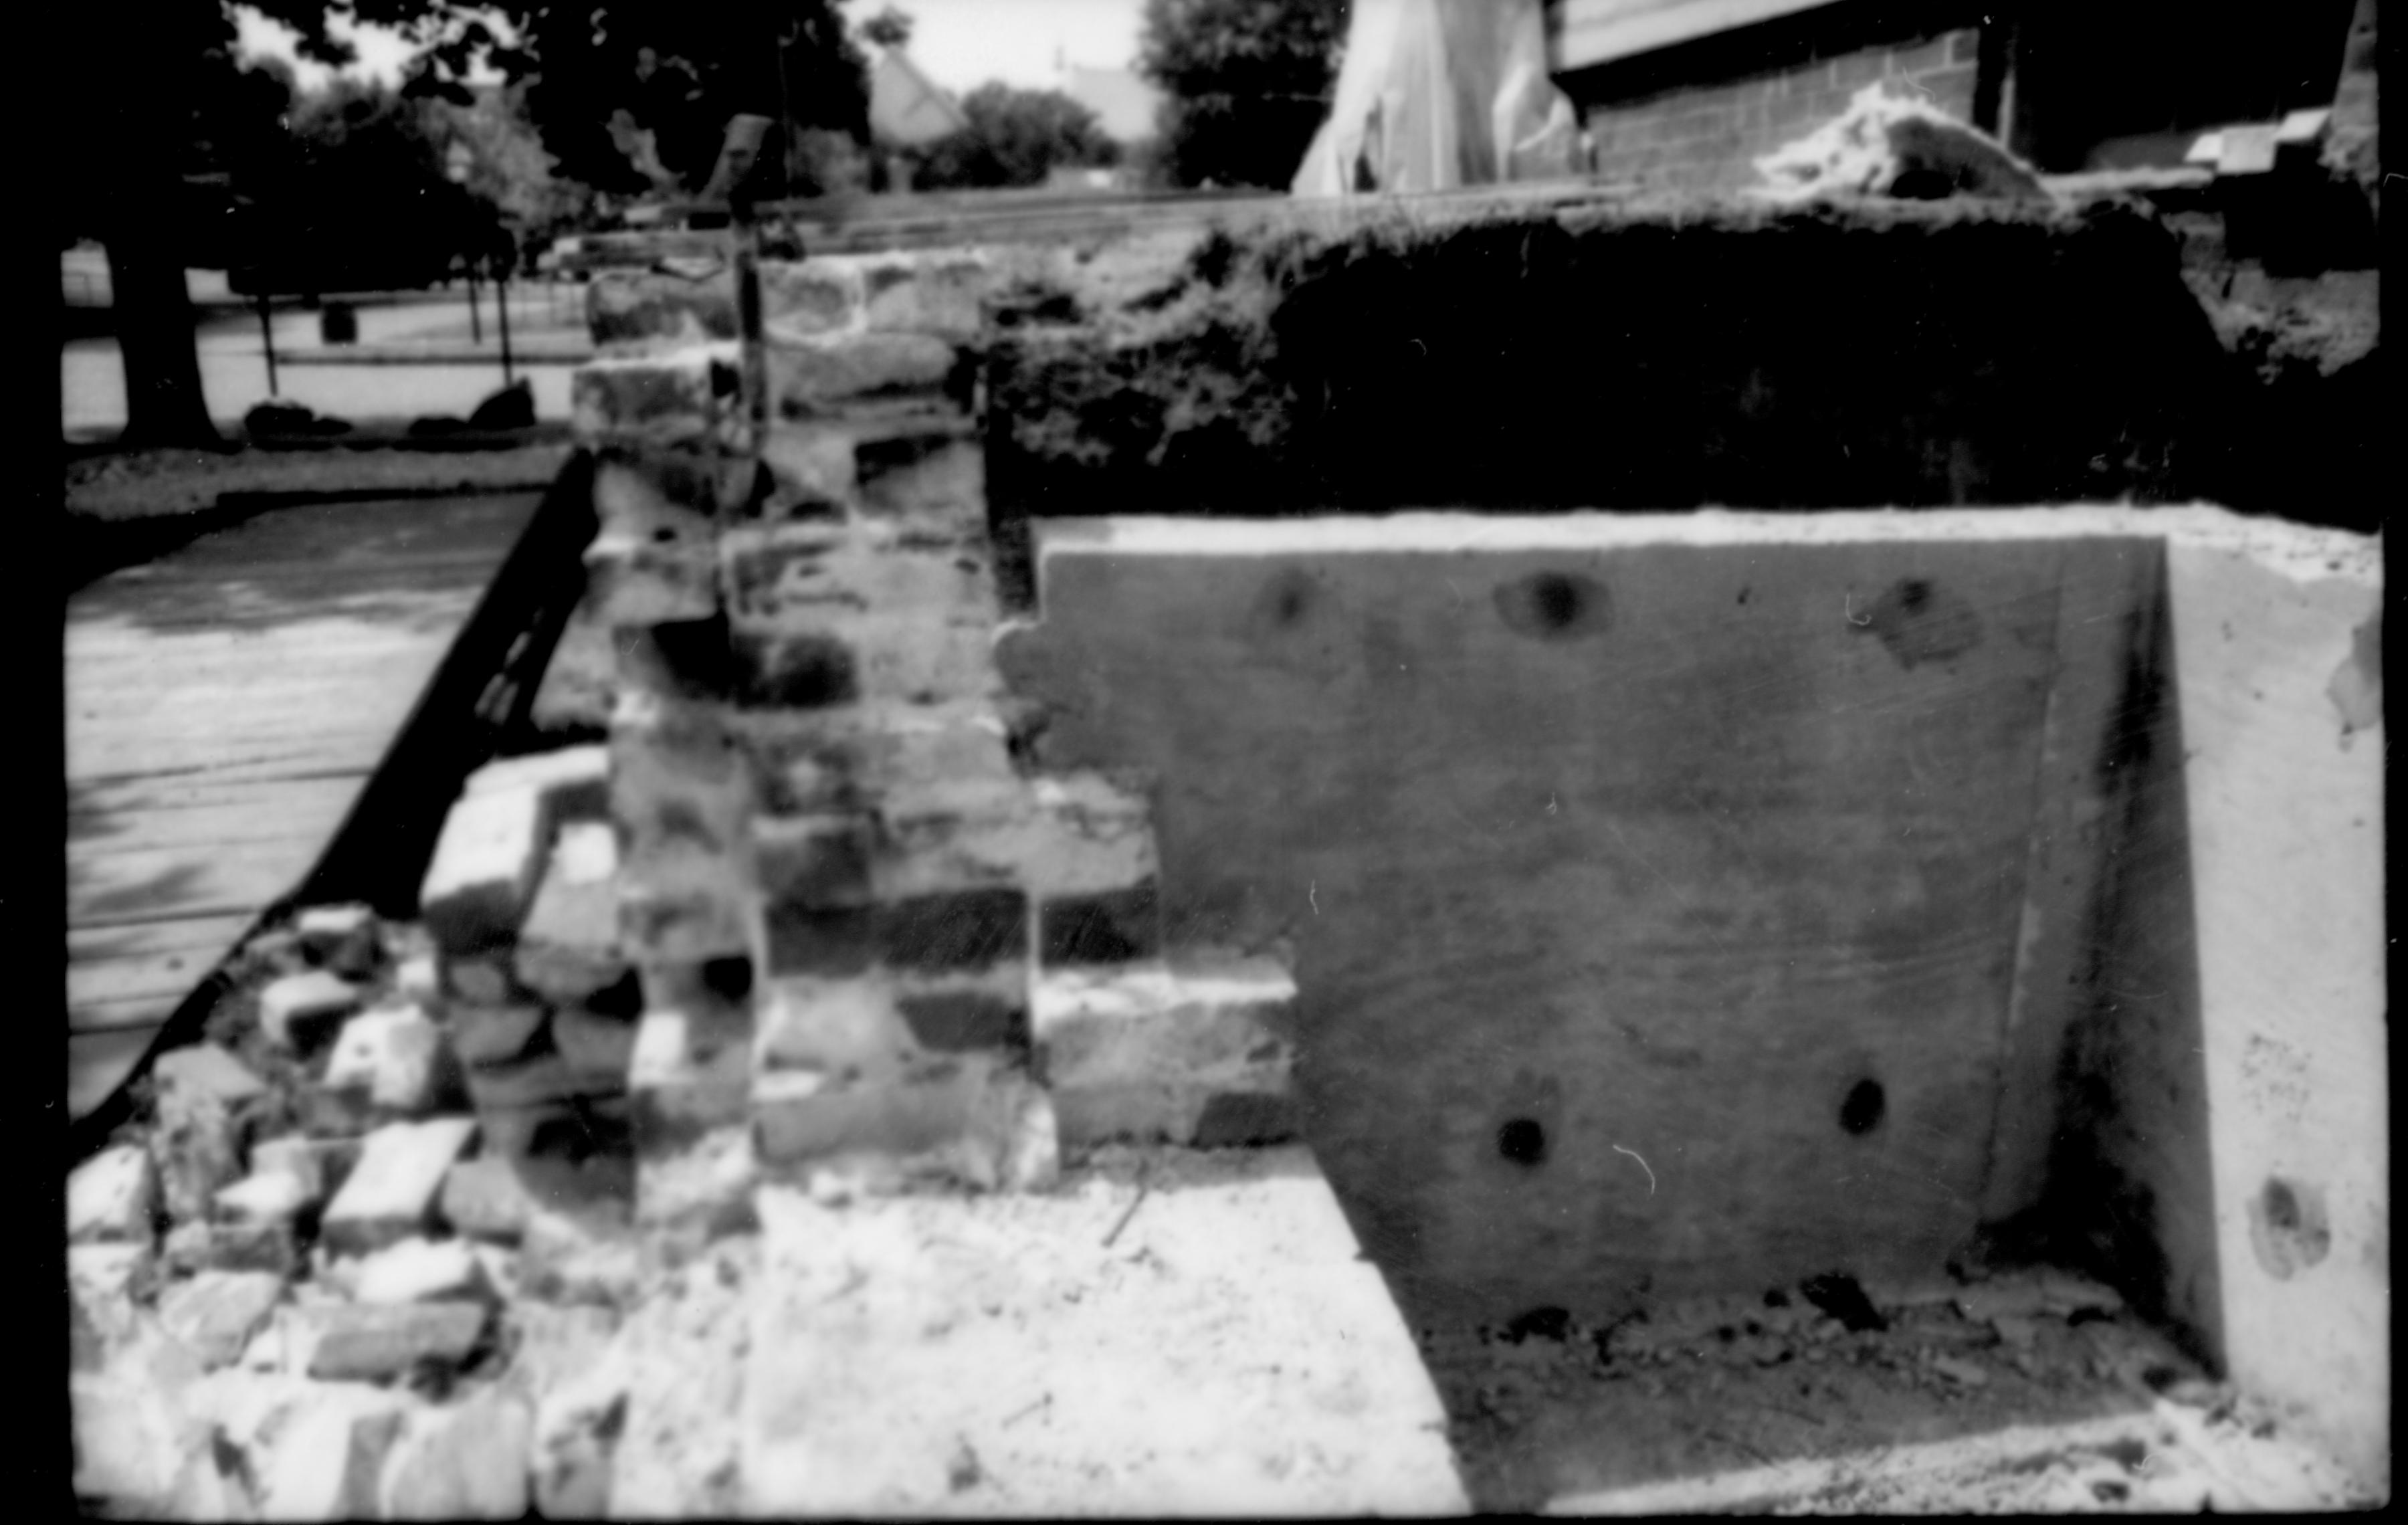 South retaining wall, and plywood form for concrete stair support, near south porch of Lincoln Home and lot. Photographer facing west.